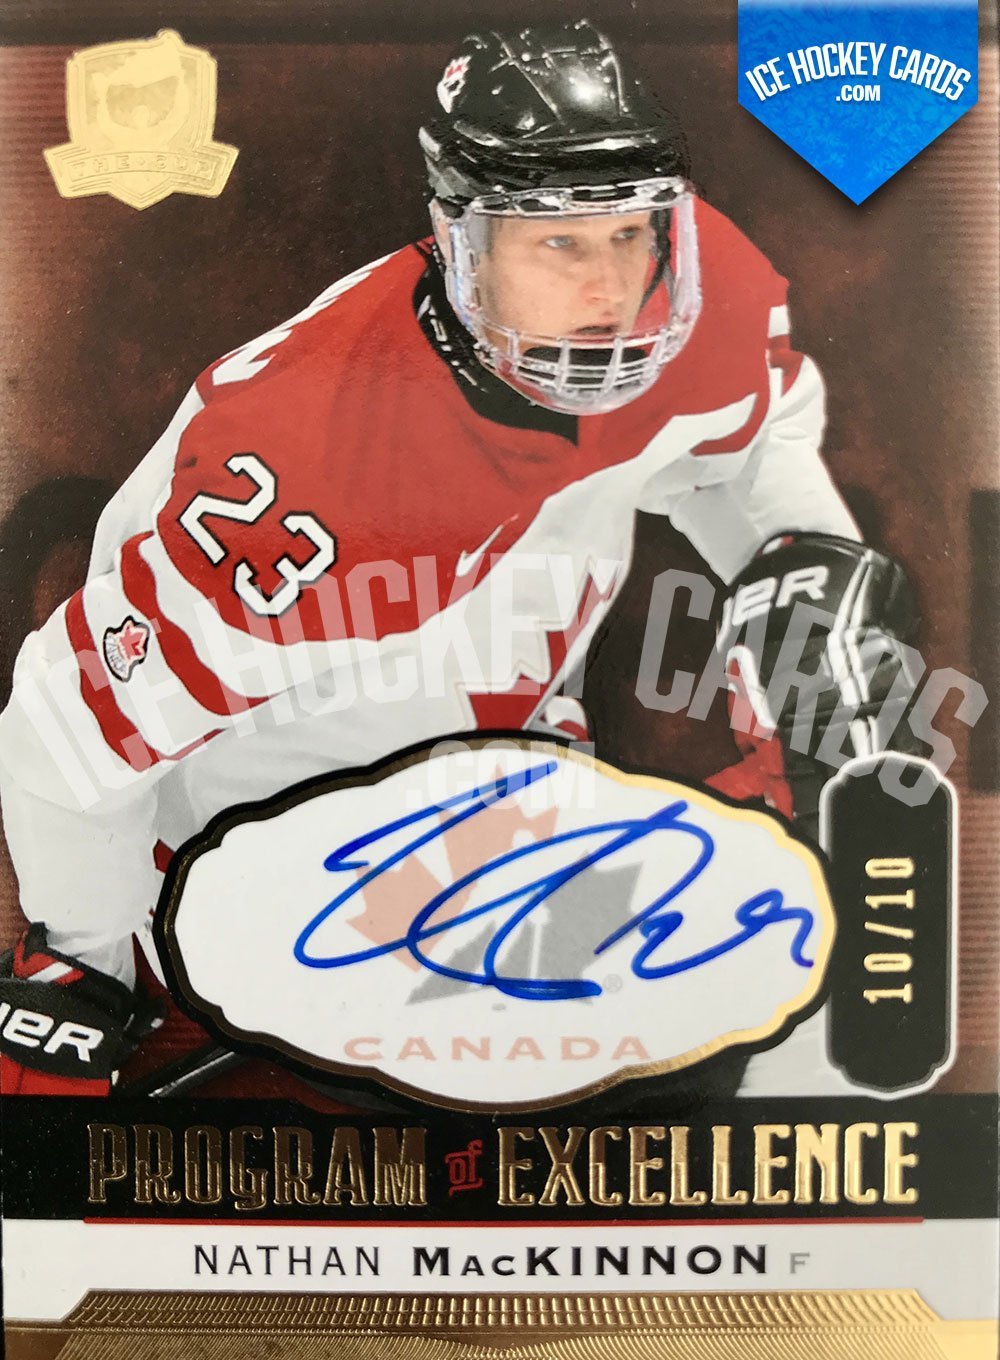 Upper Deck - The Cup 2014-15 - Nathan MacKinnon Program of Excellence Team Canada Autograph # 10 of 10 RARE